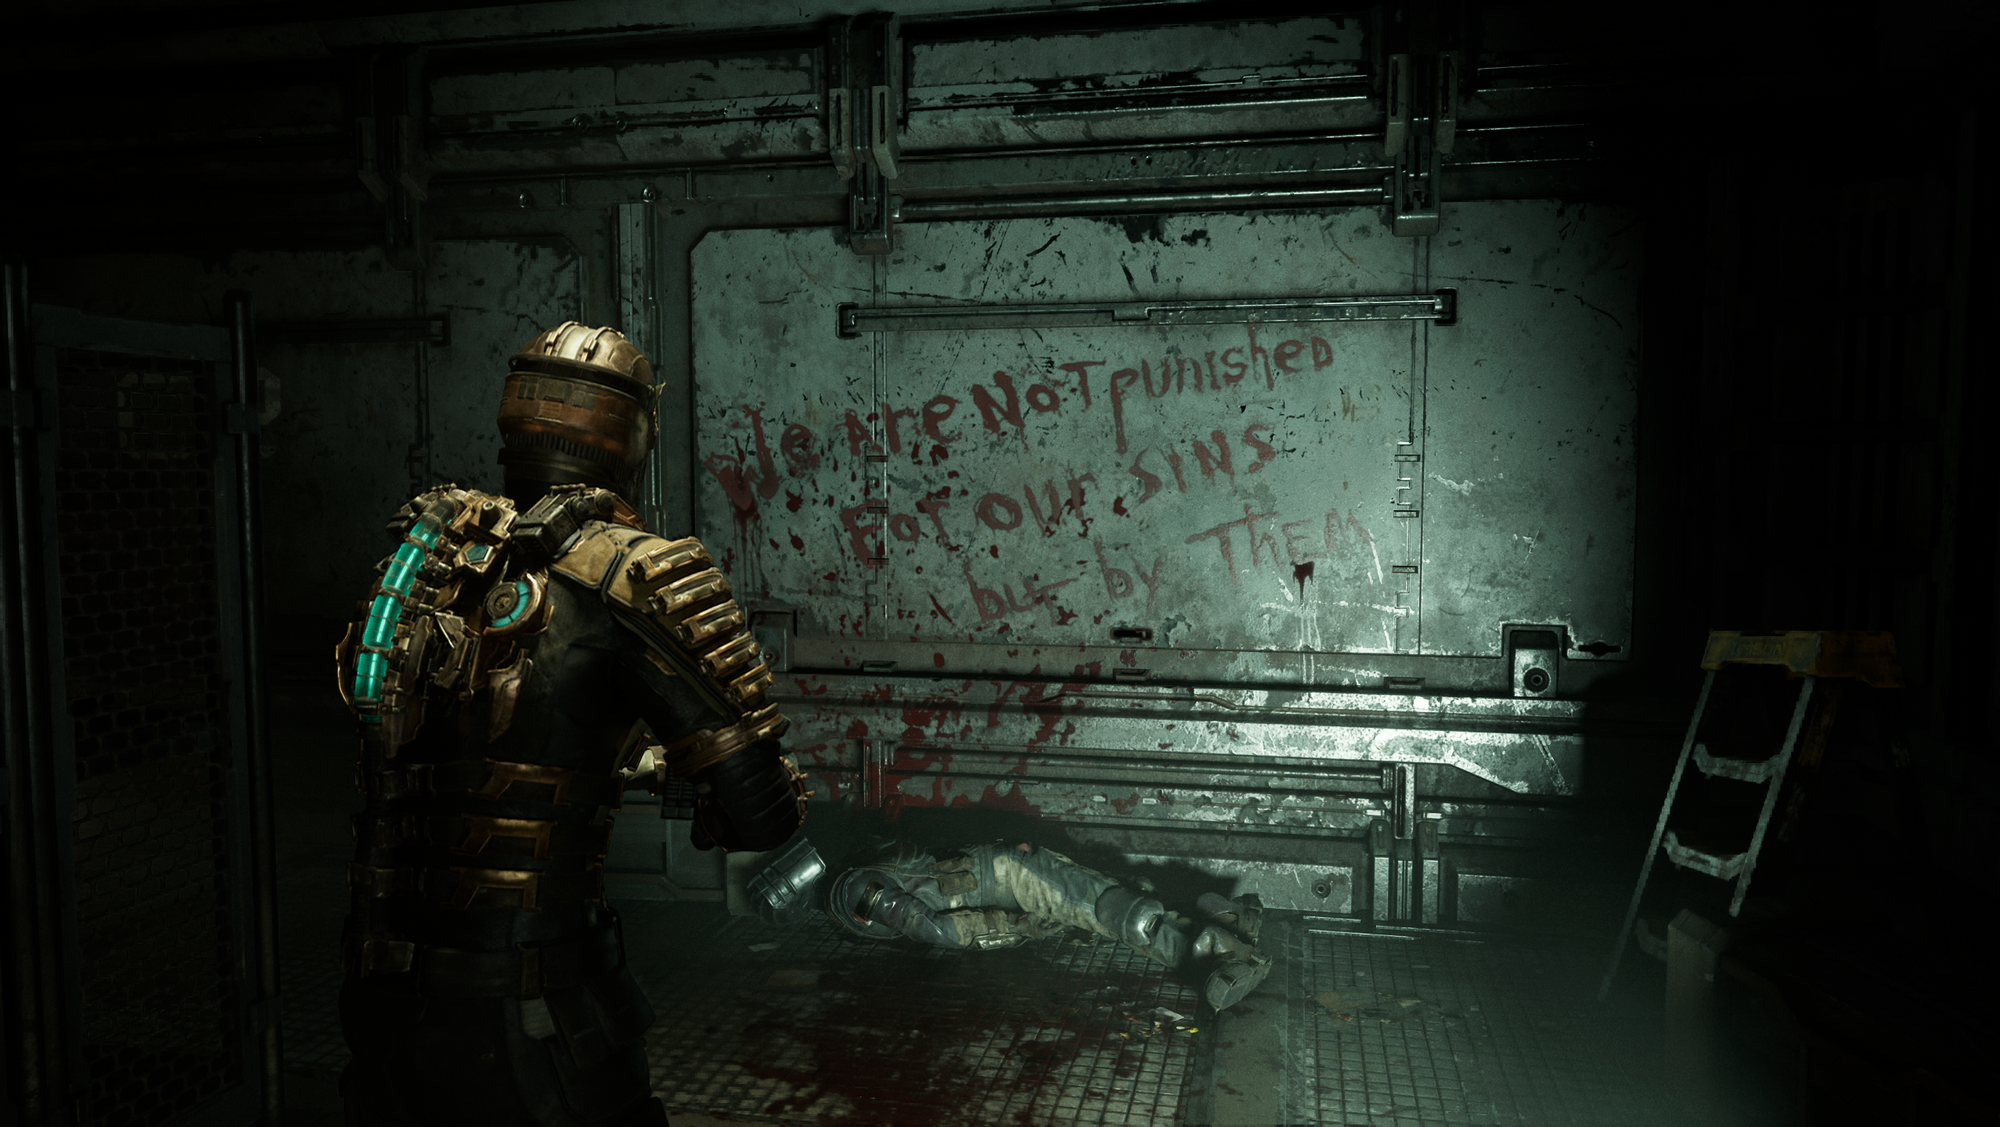 In-game screenshot of Isaac finding a grisly scene of a dead body and bloody writing on the wall